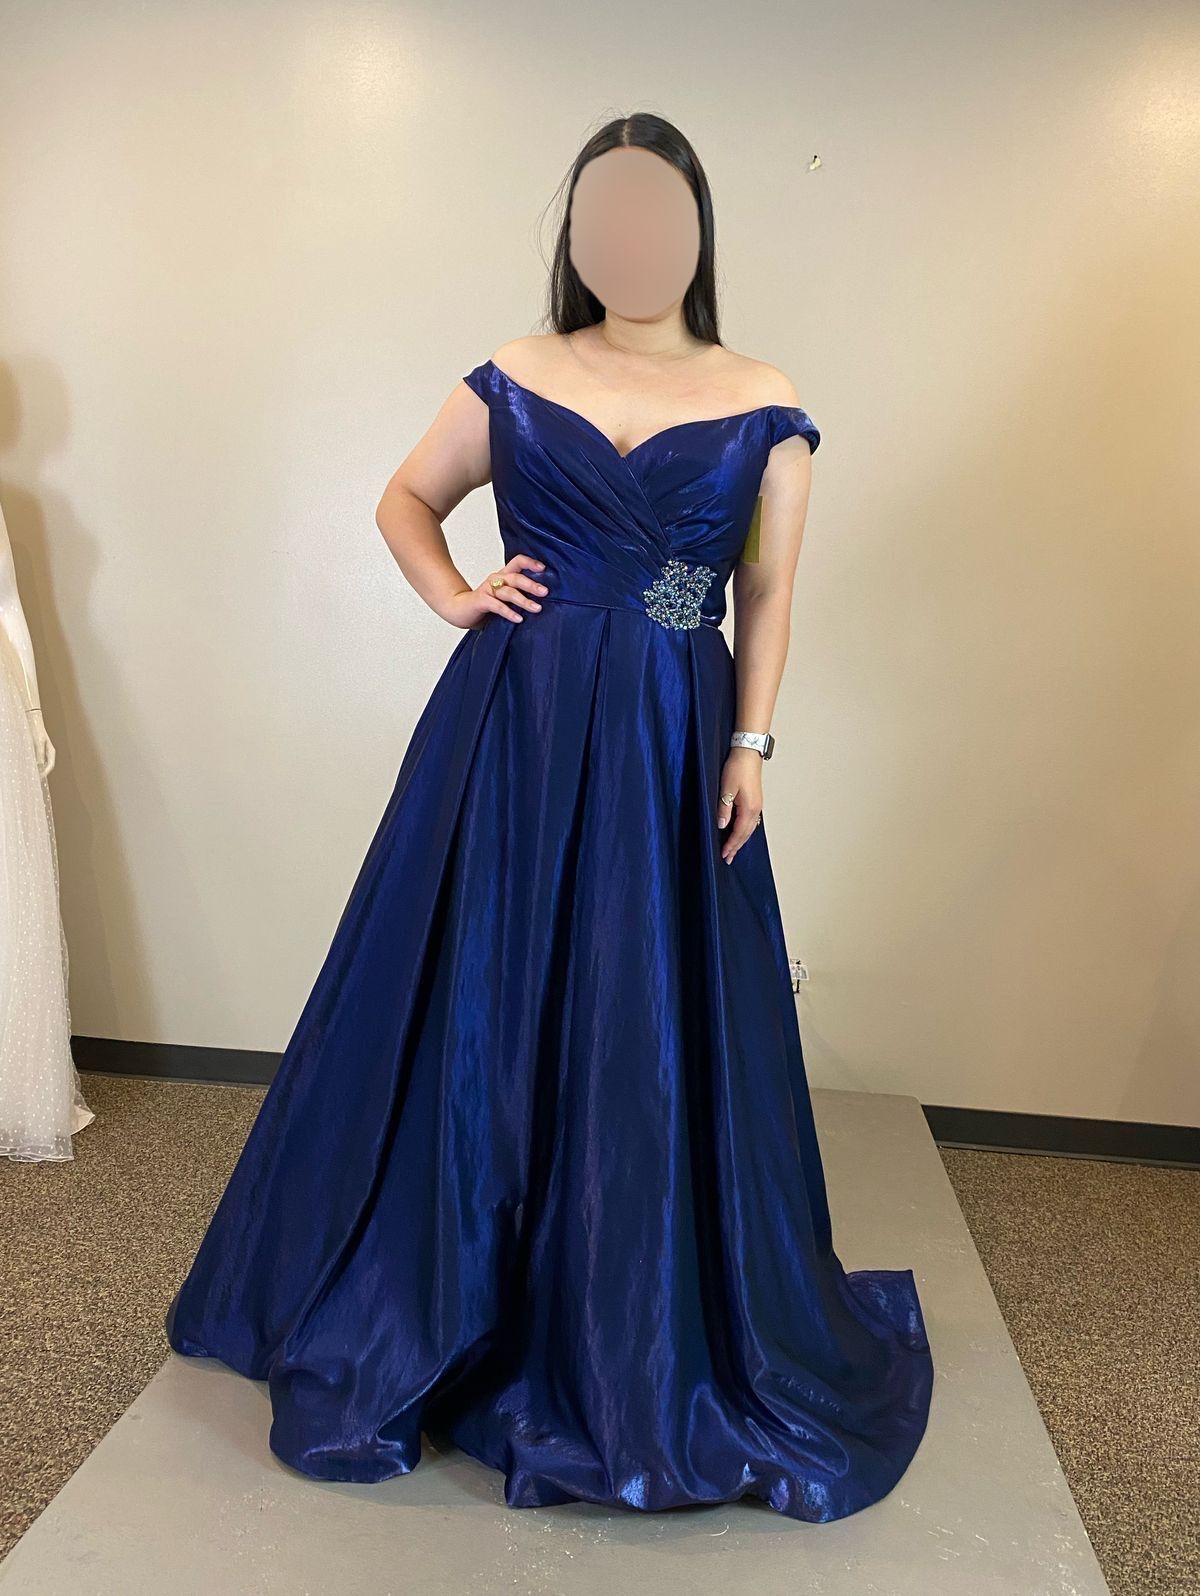 Sherri Hill Size 14 Prom Off The Shoulder Satin Navy Blue Ball Gown on Queenly